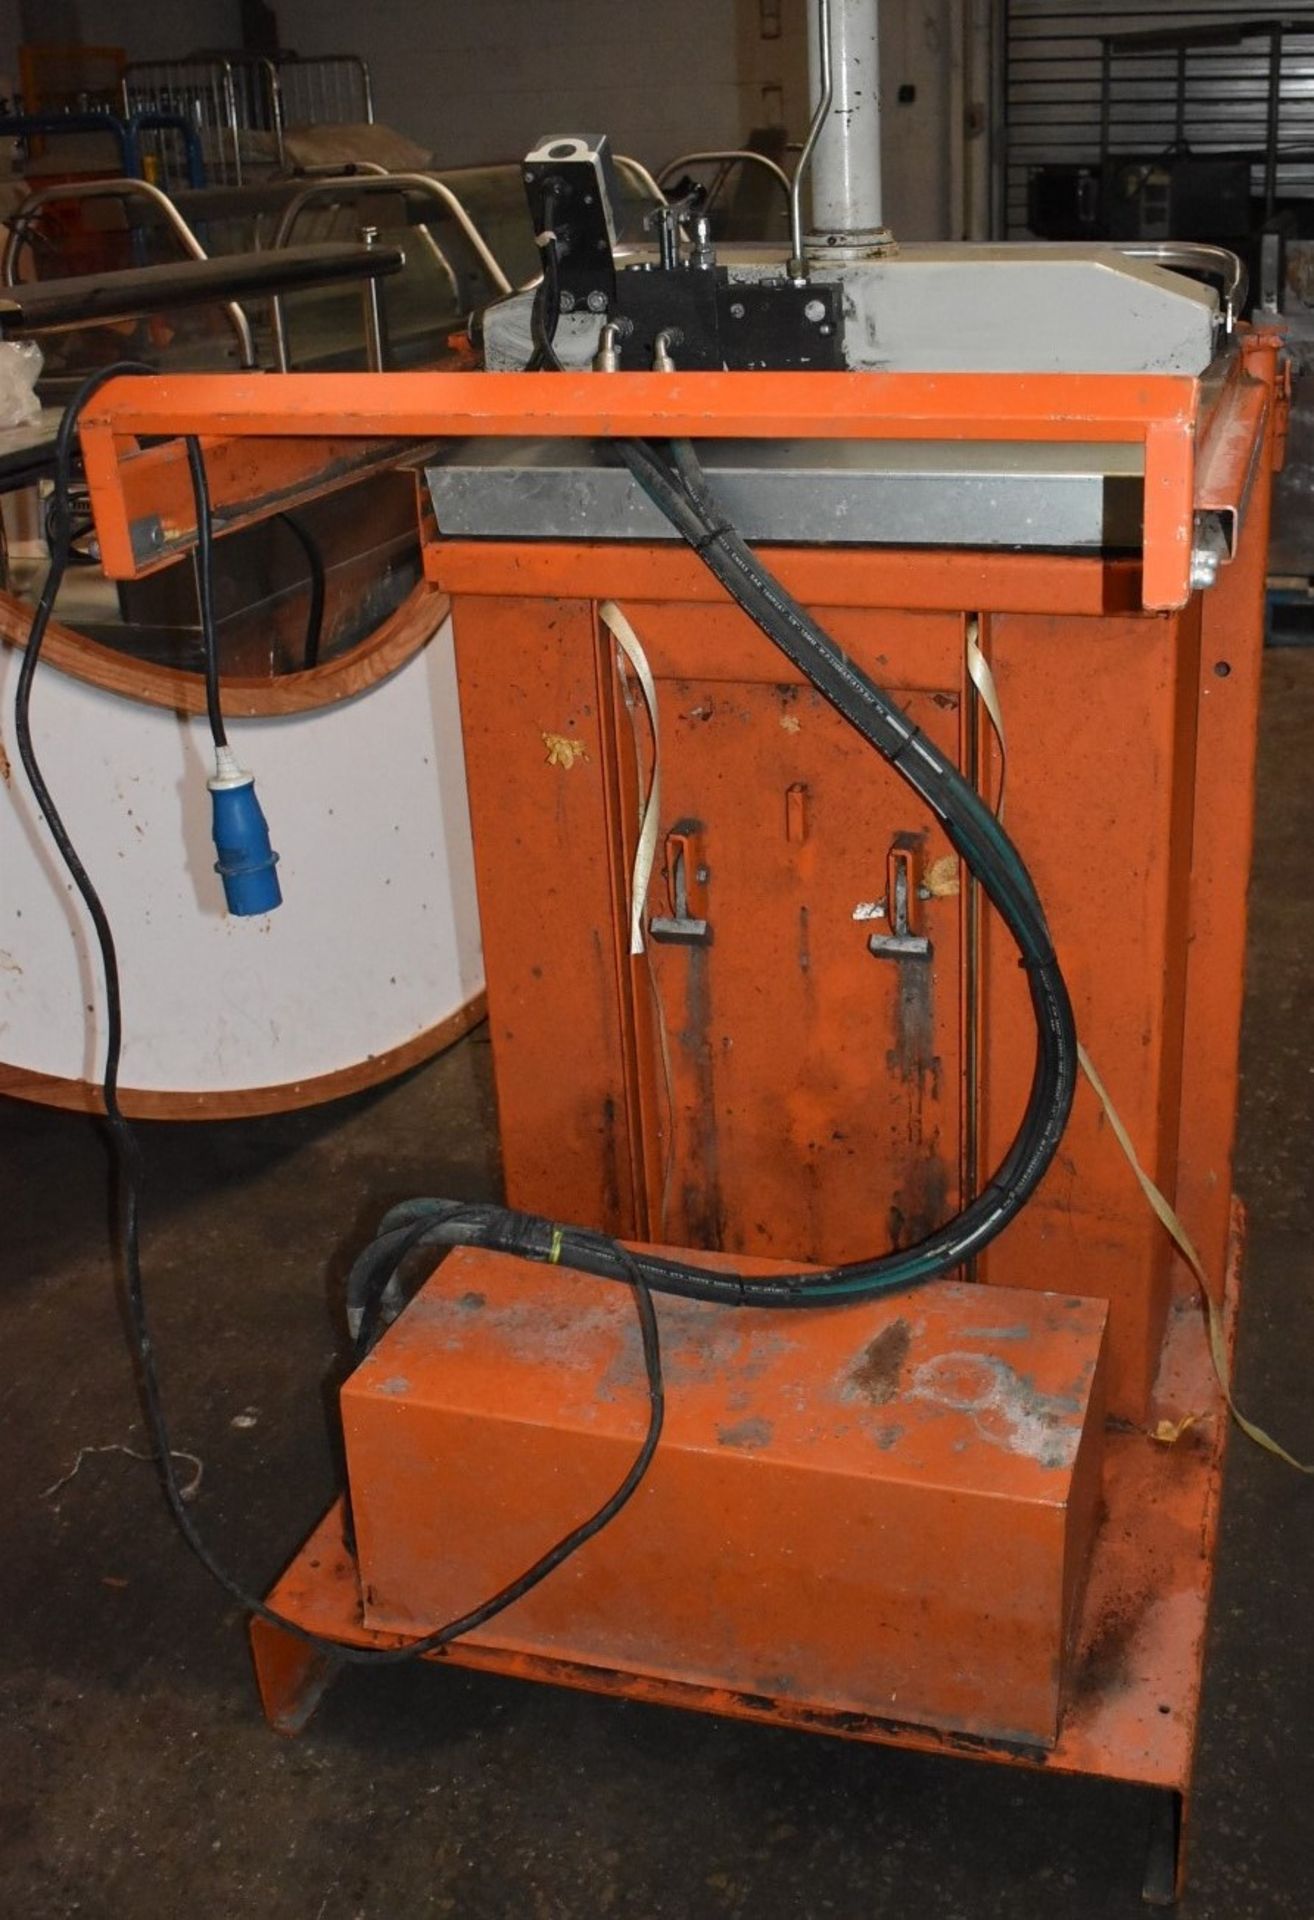 1 x Orwak 5010 Hydraulic Press Compact Cardboard Baler - Used For Compacting Recyclable or Non- - Image 8 of 15